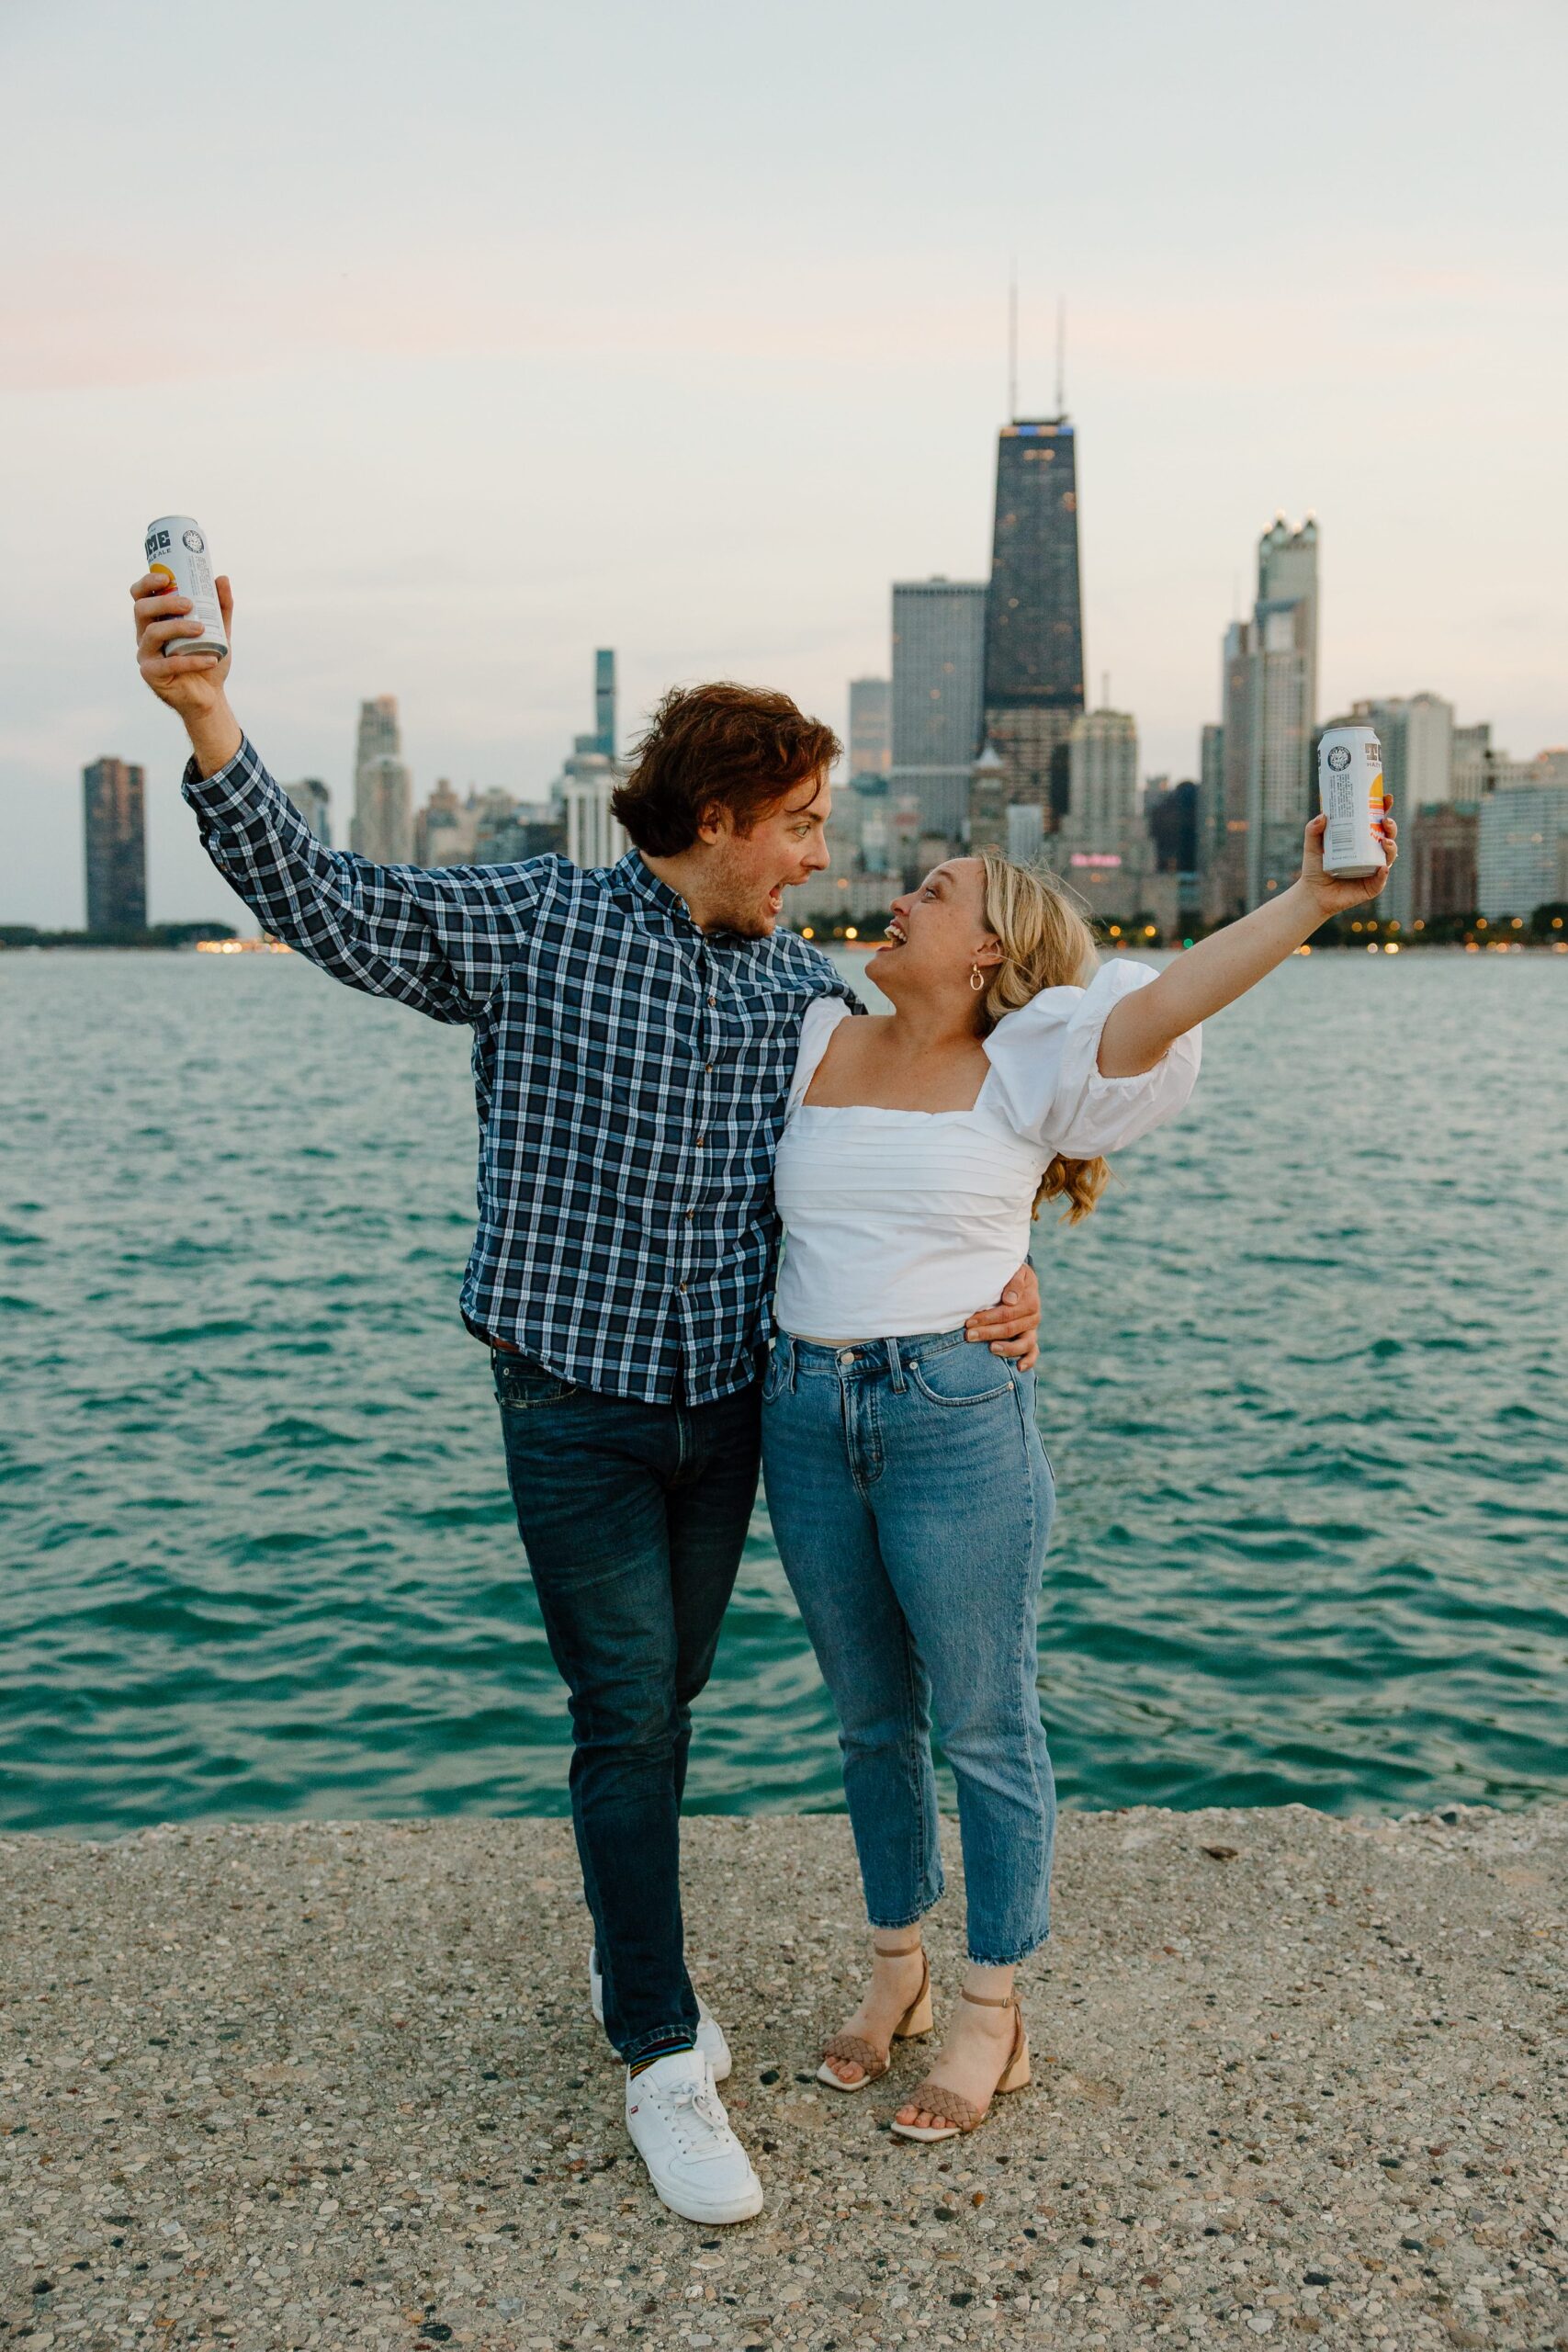 Engagement Photos: Do you need them?